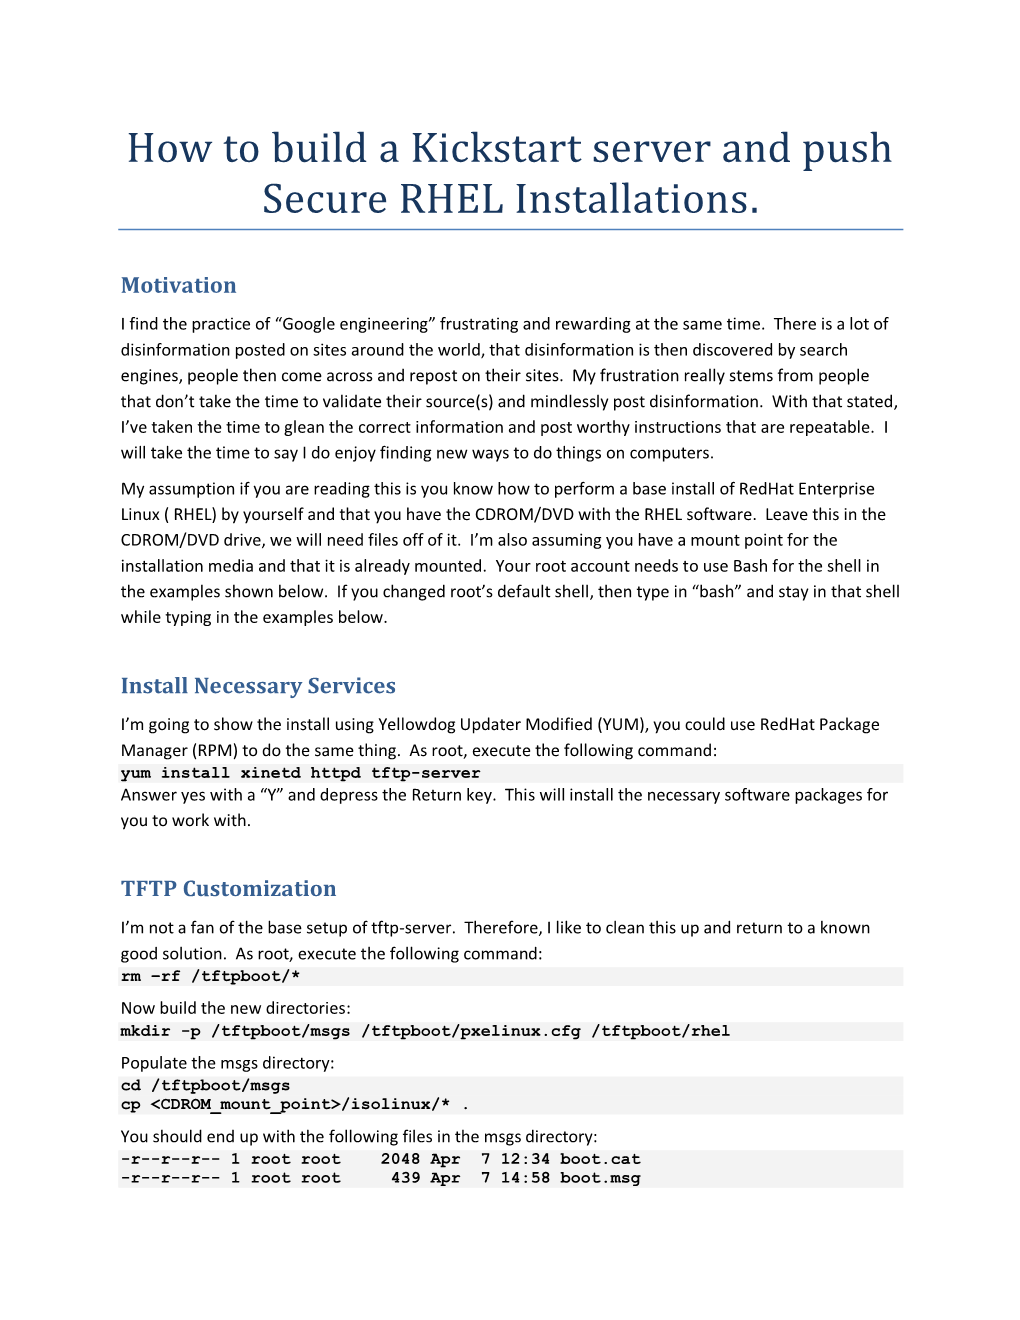 How to Build a Kickstart Server and Push Secure RHEL Installations